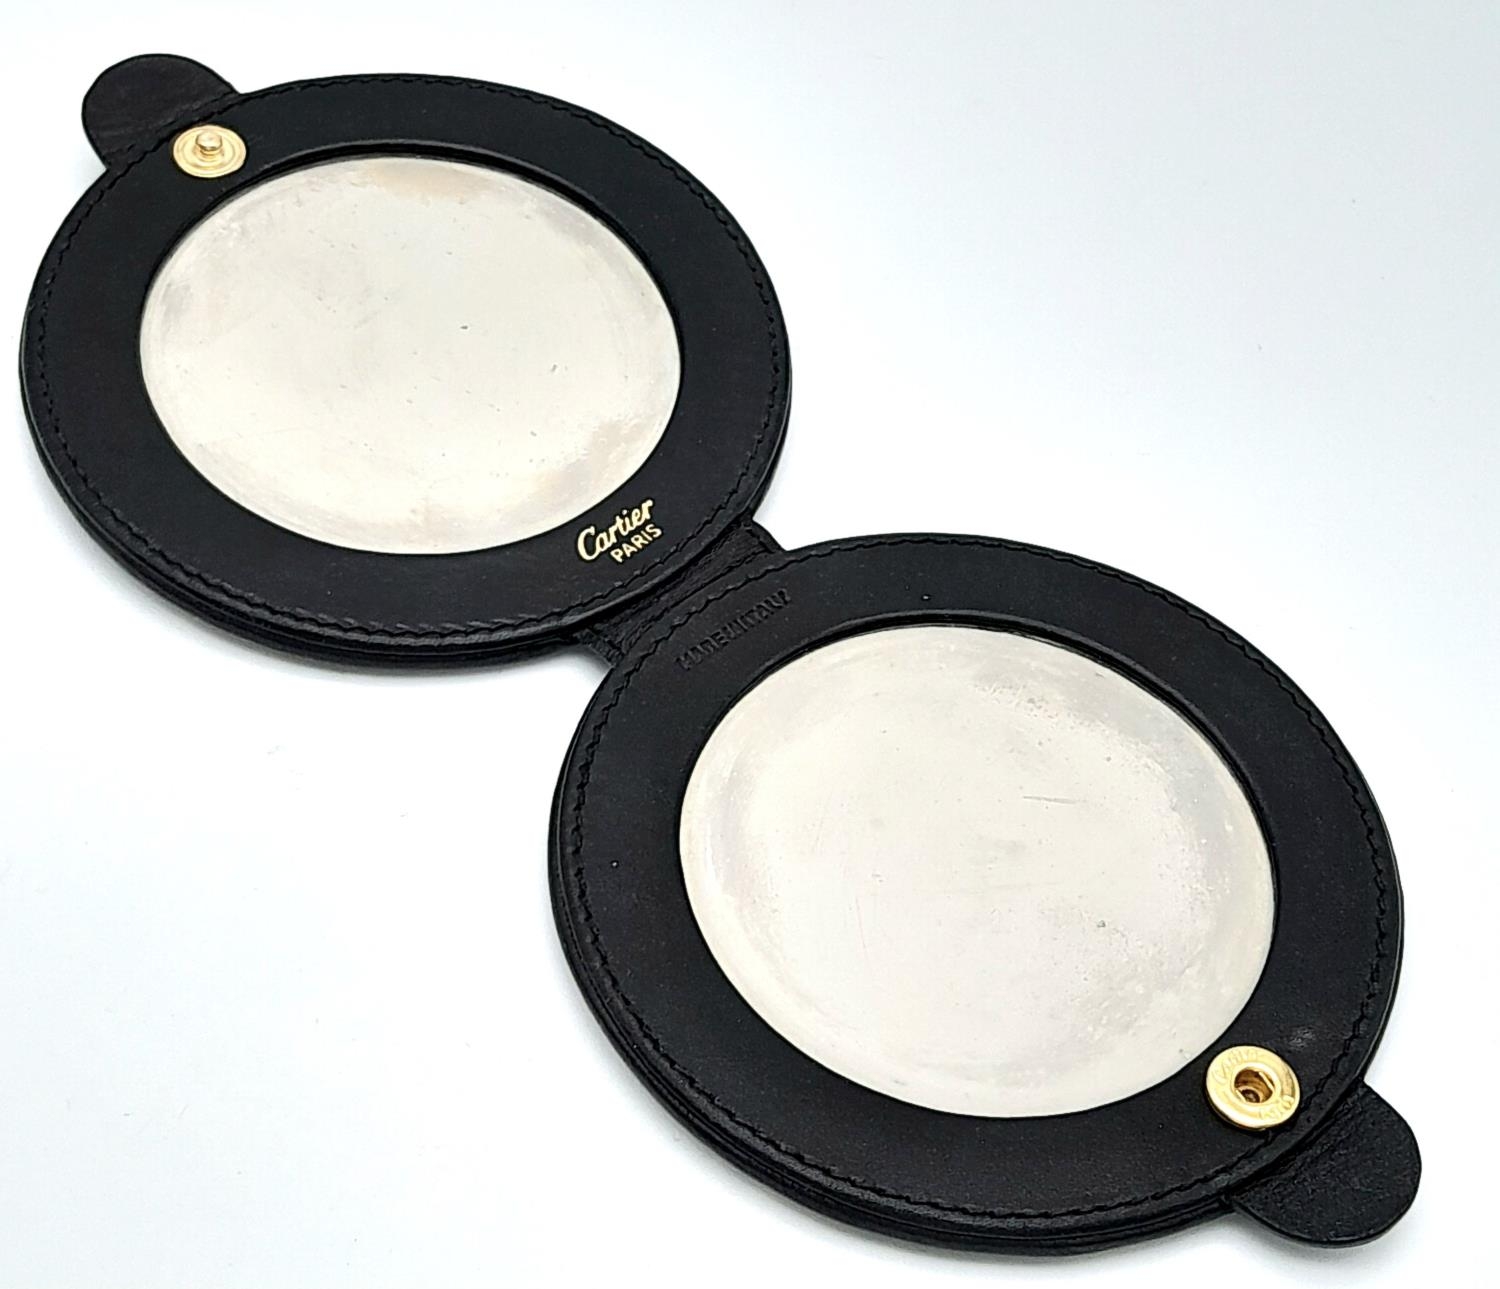 A vintage, CARTIER PANTHER double vanity mirror in a soft black leather cover, diameter: 9 cm. - Image 2 of 6